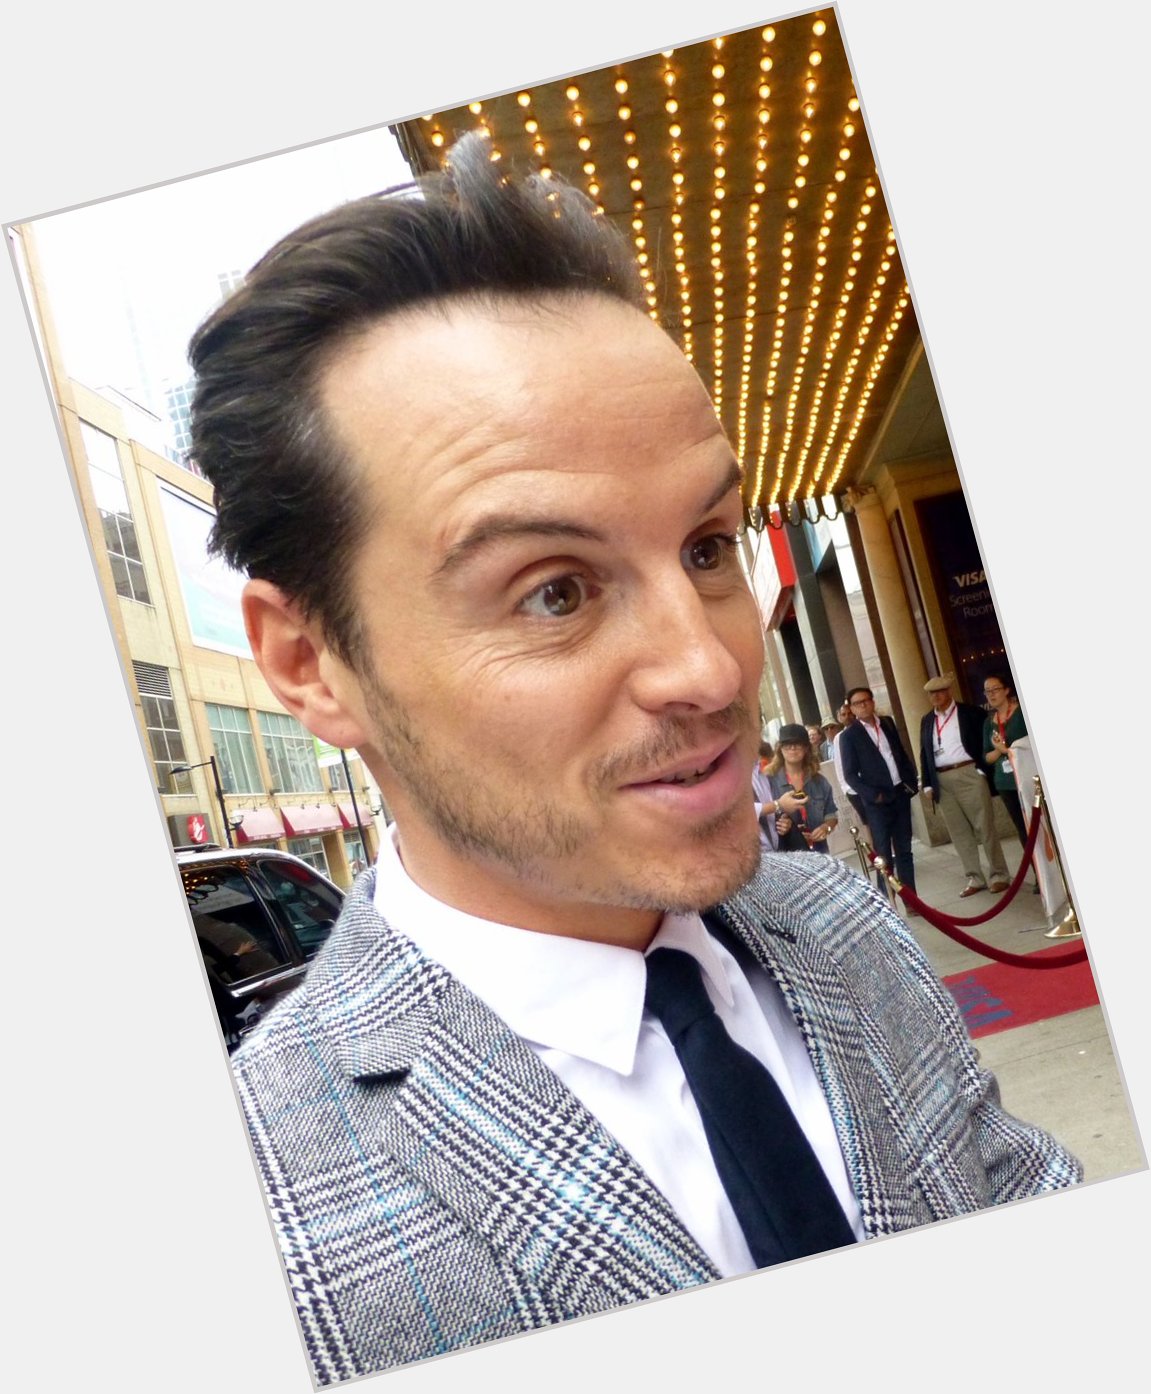 IM ALMOST OUT OF TIME BUT HAPPY BIRTHDAY ANDREW SCOTT I LOVE U SO MUCH 